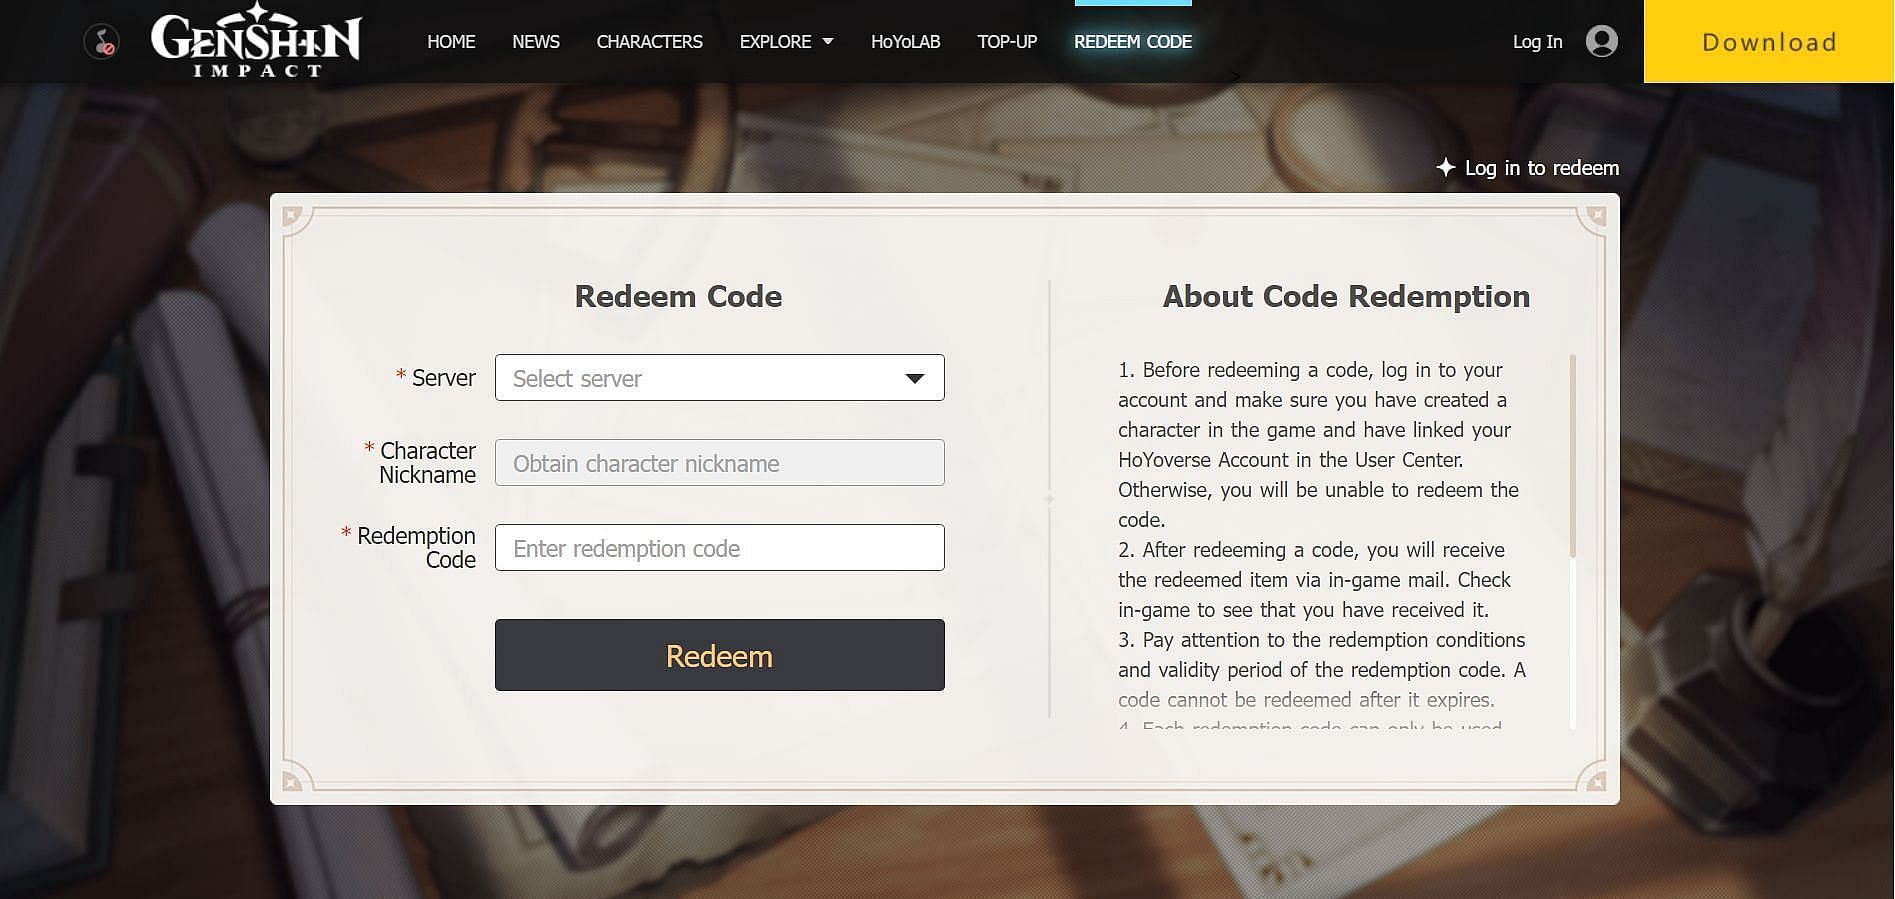 Dedicated site made by officials to redeem codes (Image via HoYoverse)